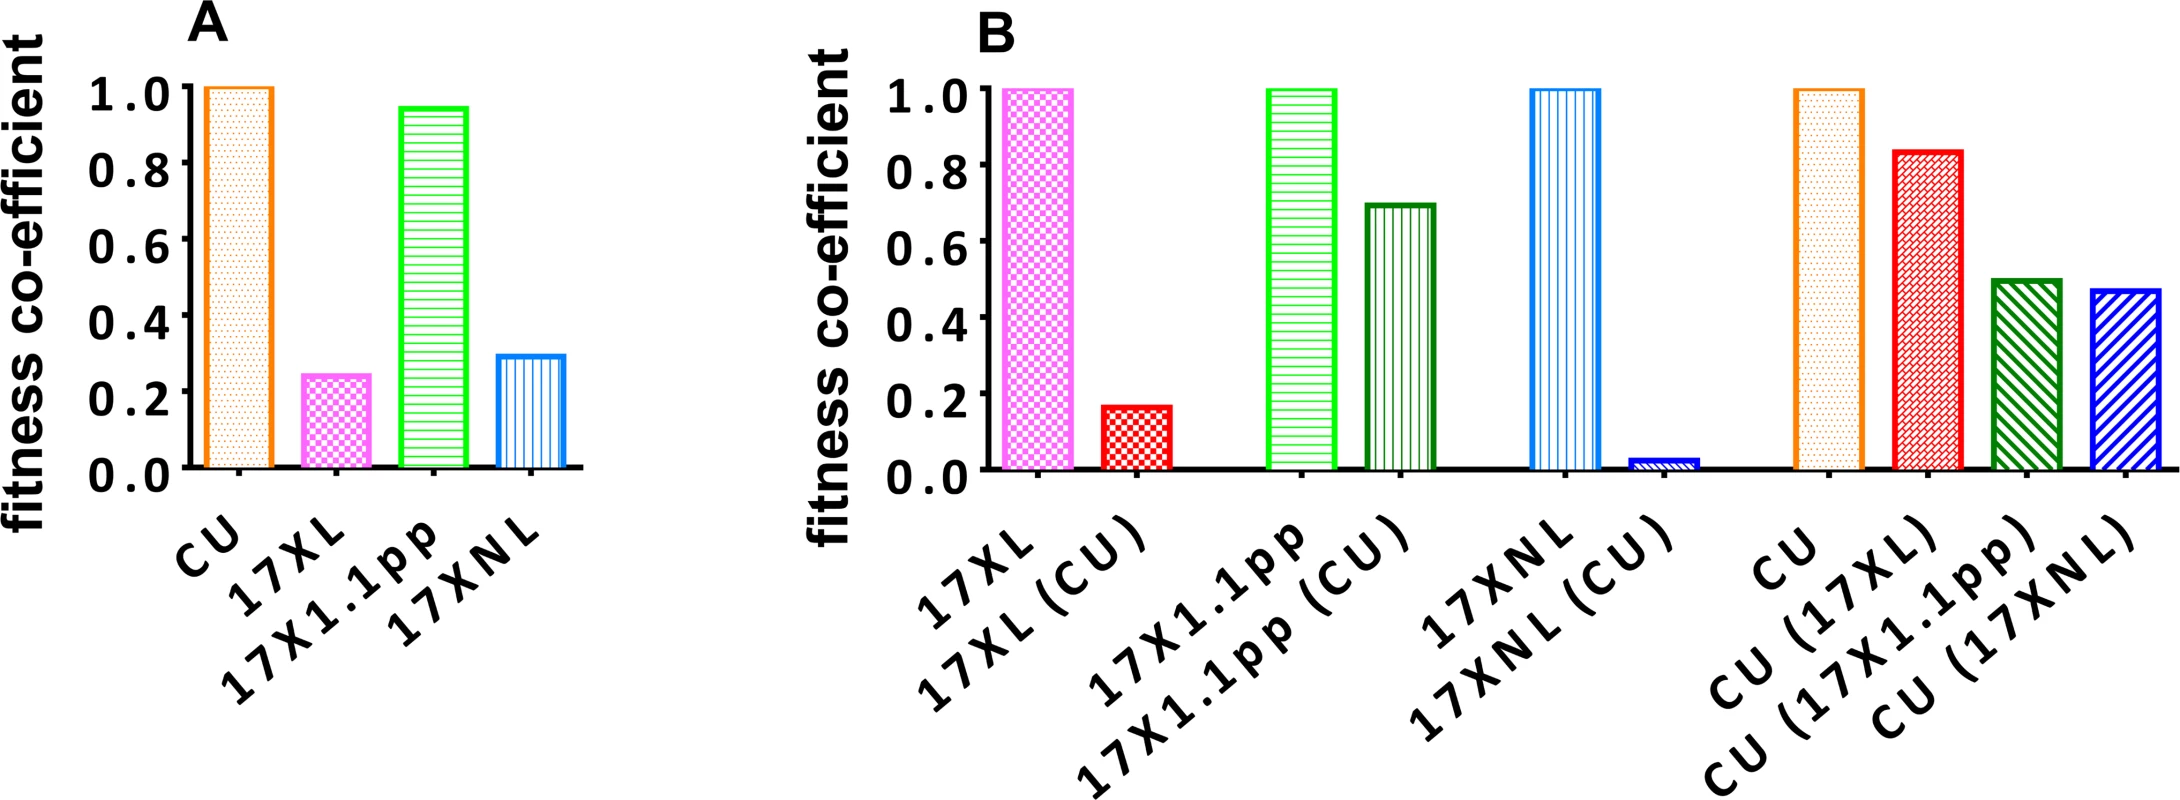 Relative fitness of avirulent (CU and 17XNL), intermediately virulent (17X1.1pp) and virulent (17XL) strains of <i>Plasmodium yoelii yoelii</i> in single (Panel A) or in mixed (B) infections.